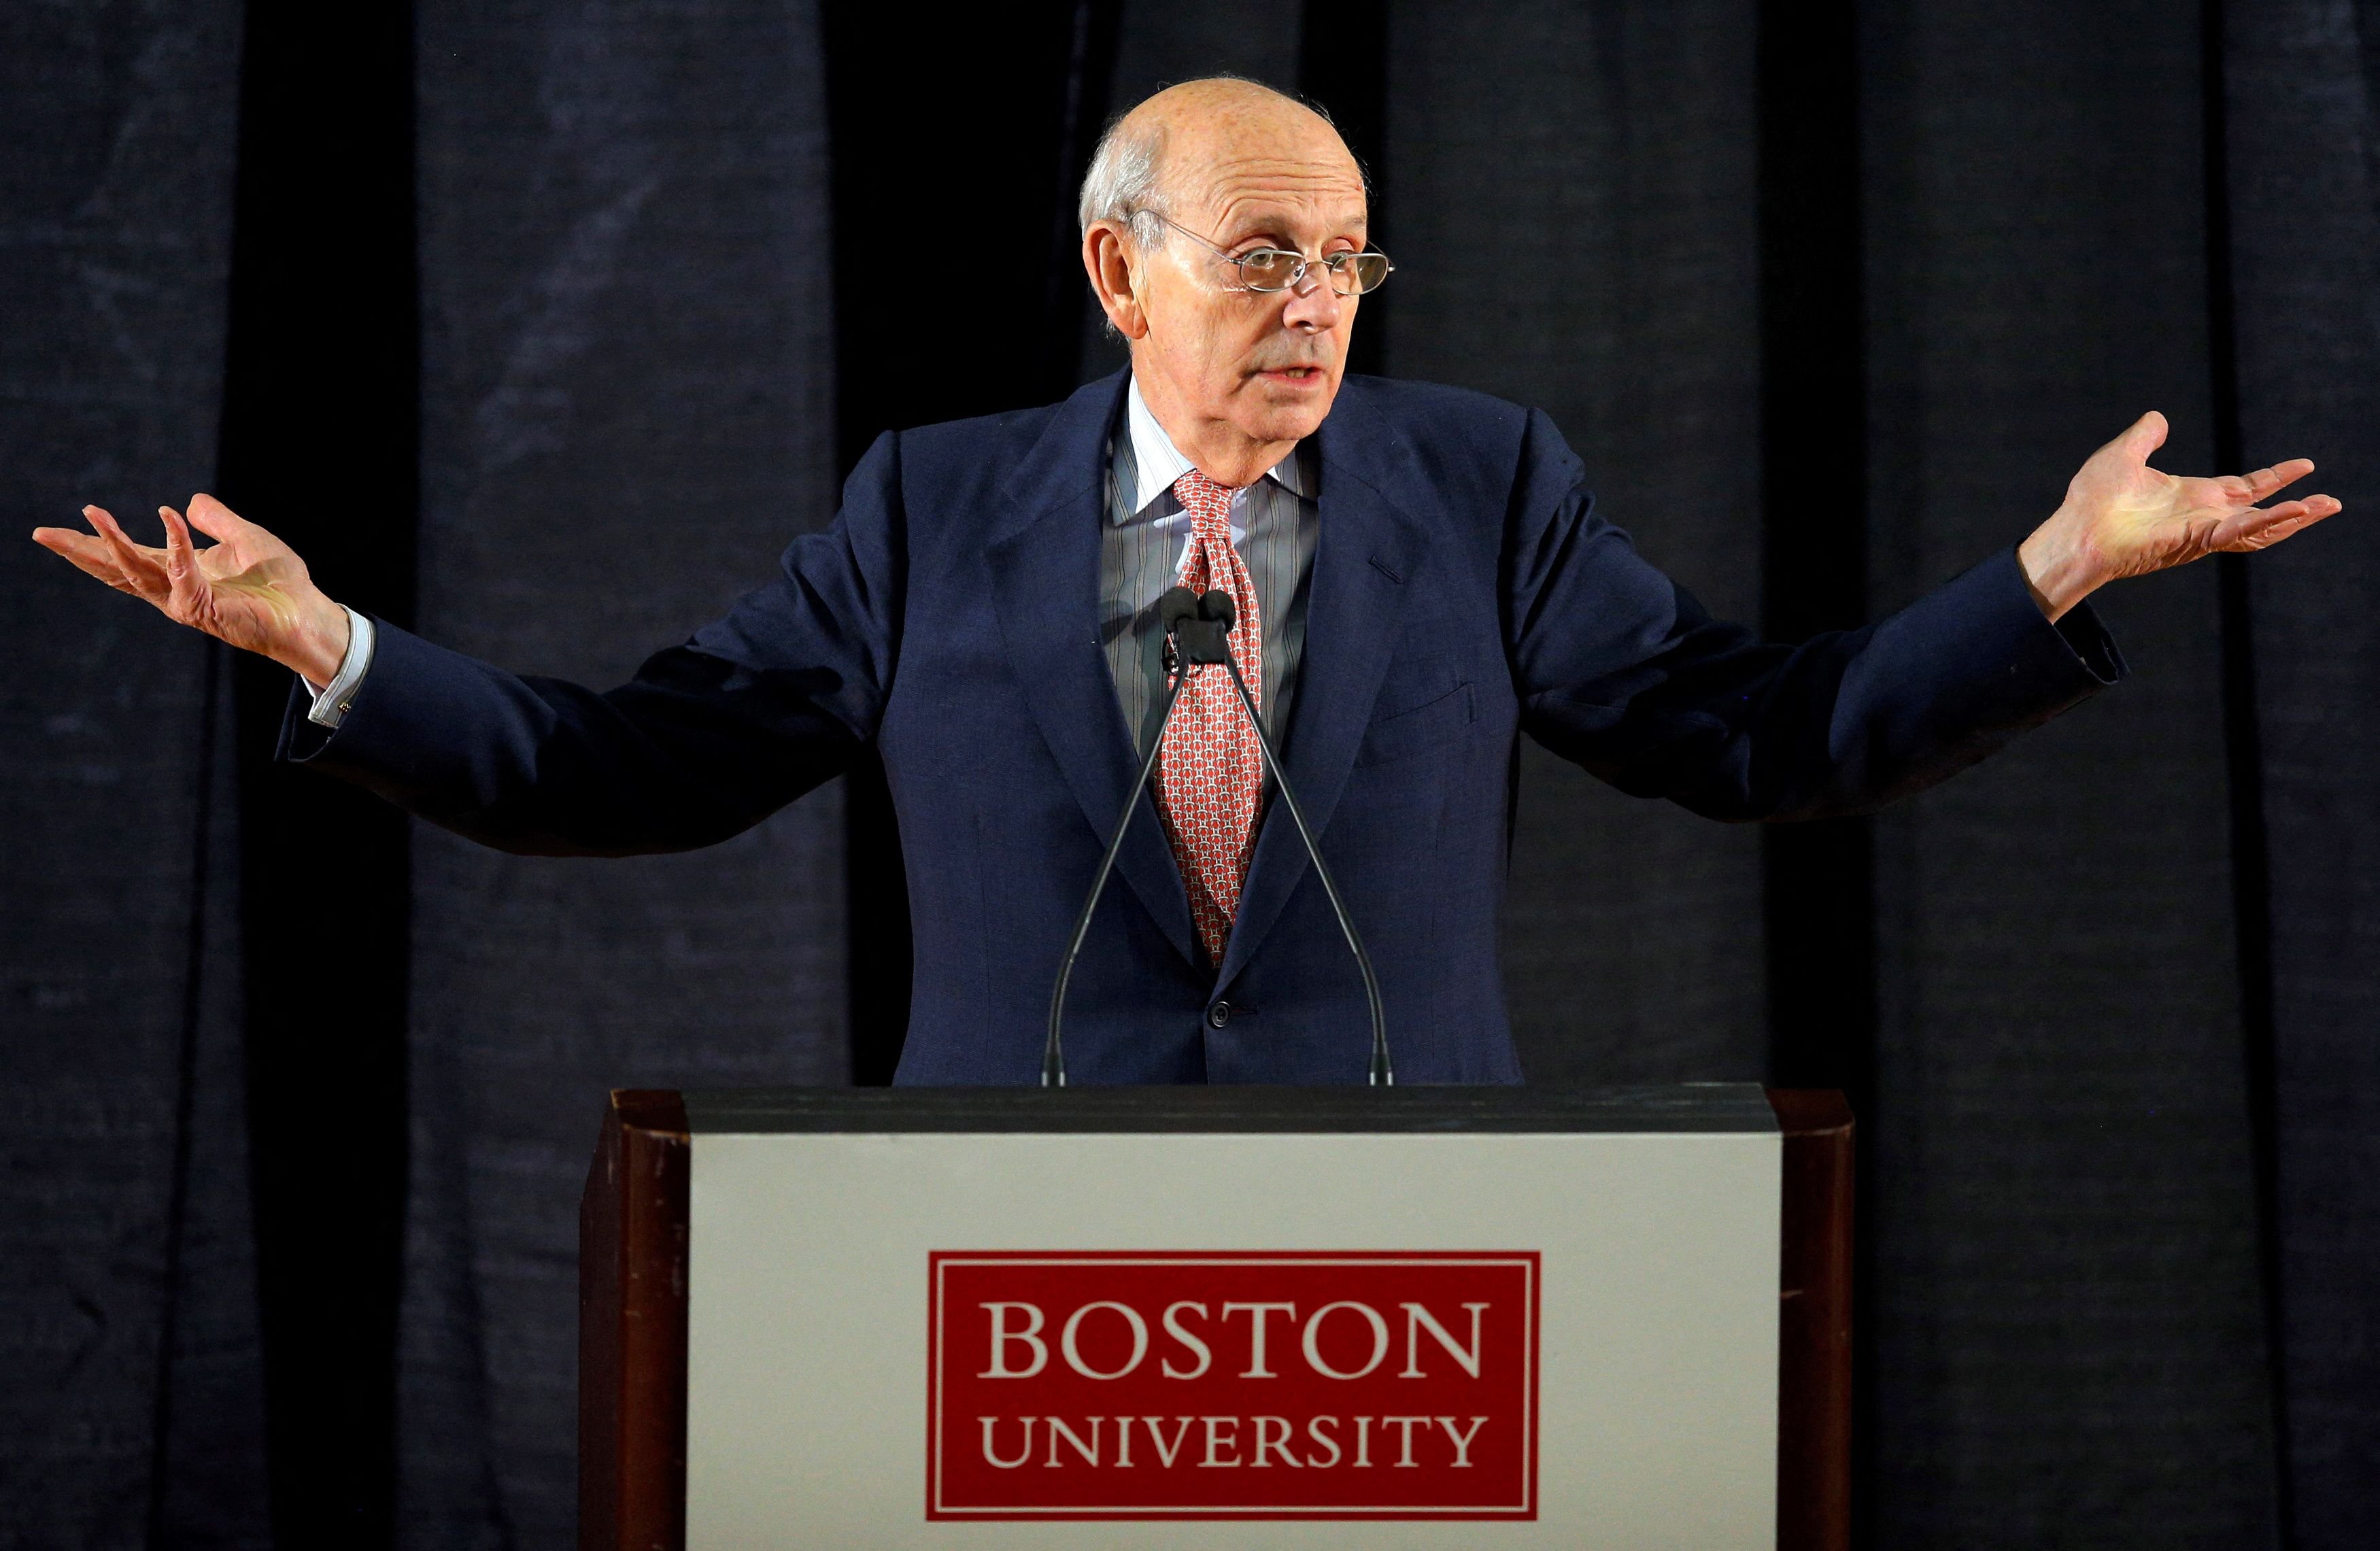 U.S. Supreme Court Justice Stephen Breyer is pictured in a 2013 photo at Boston University. (CNS photo/Brian Snyder, Reuters)